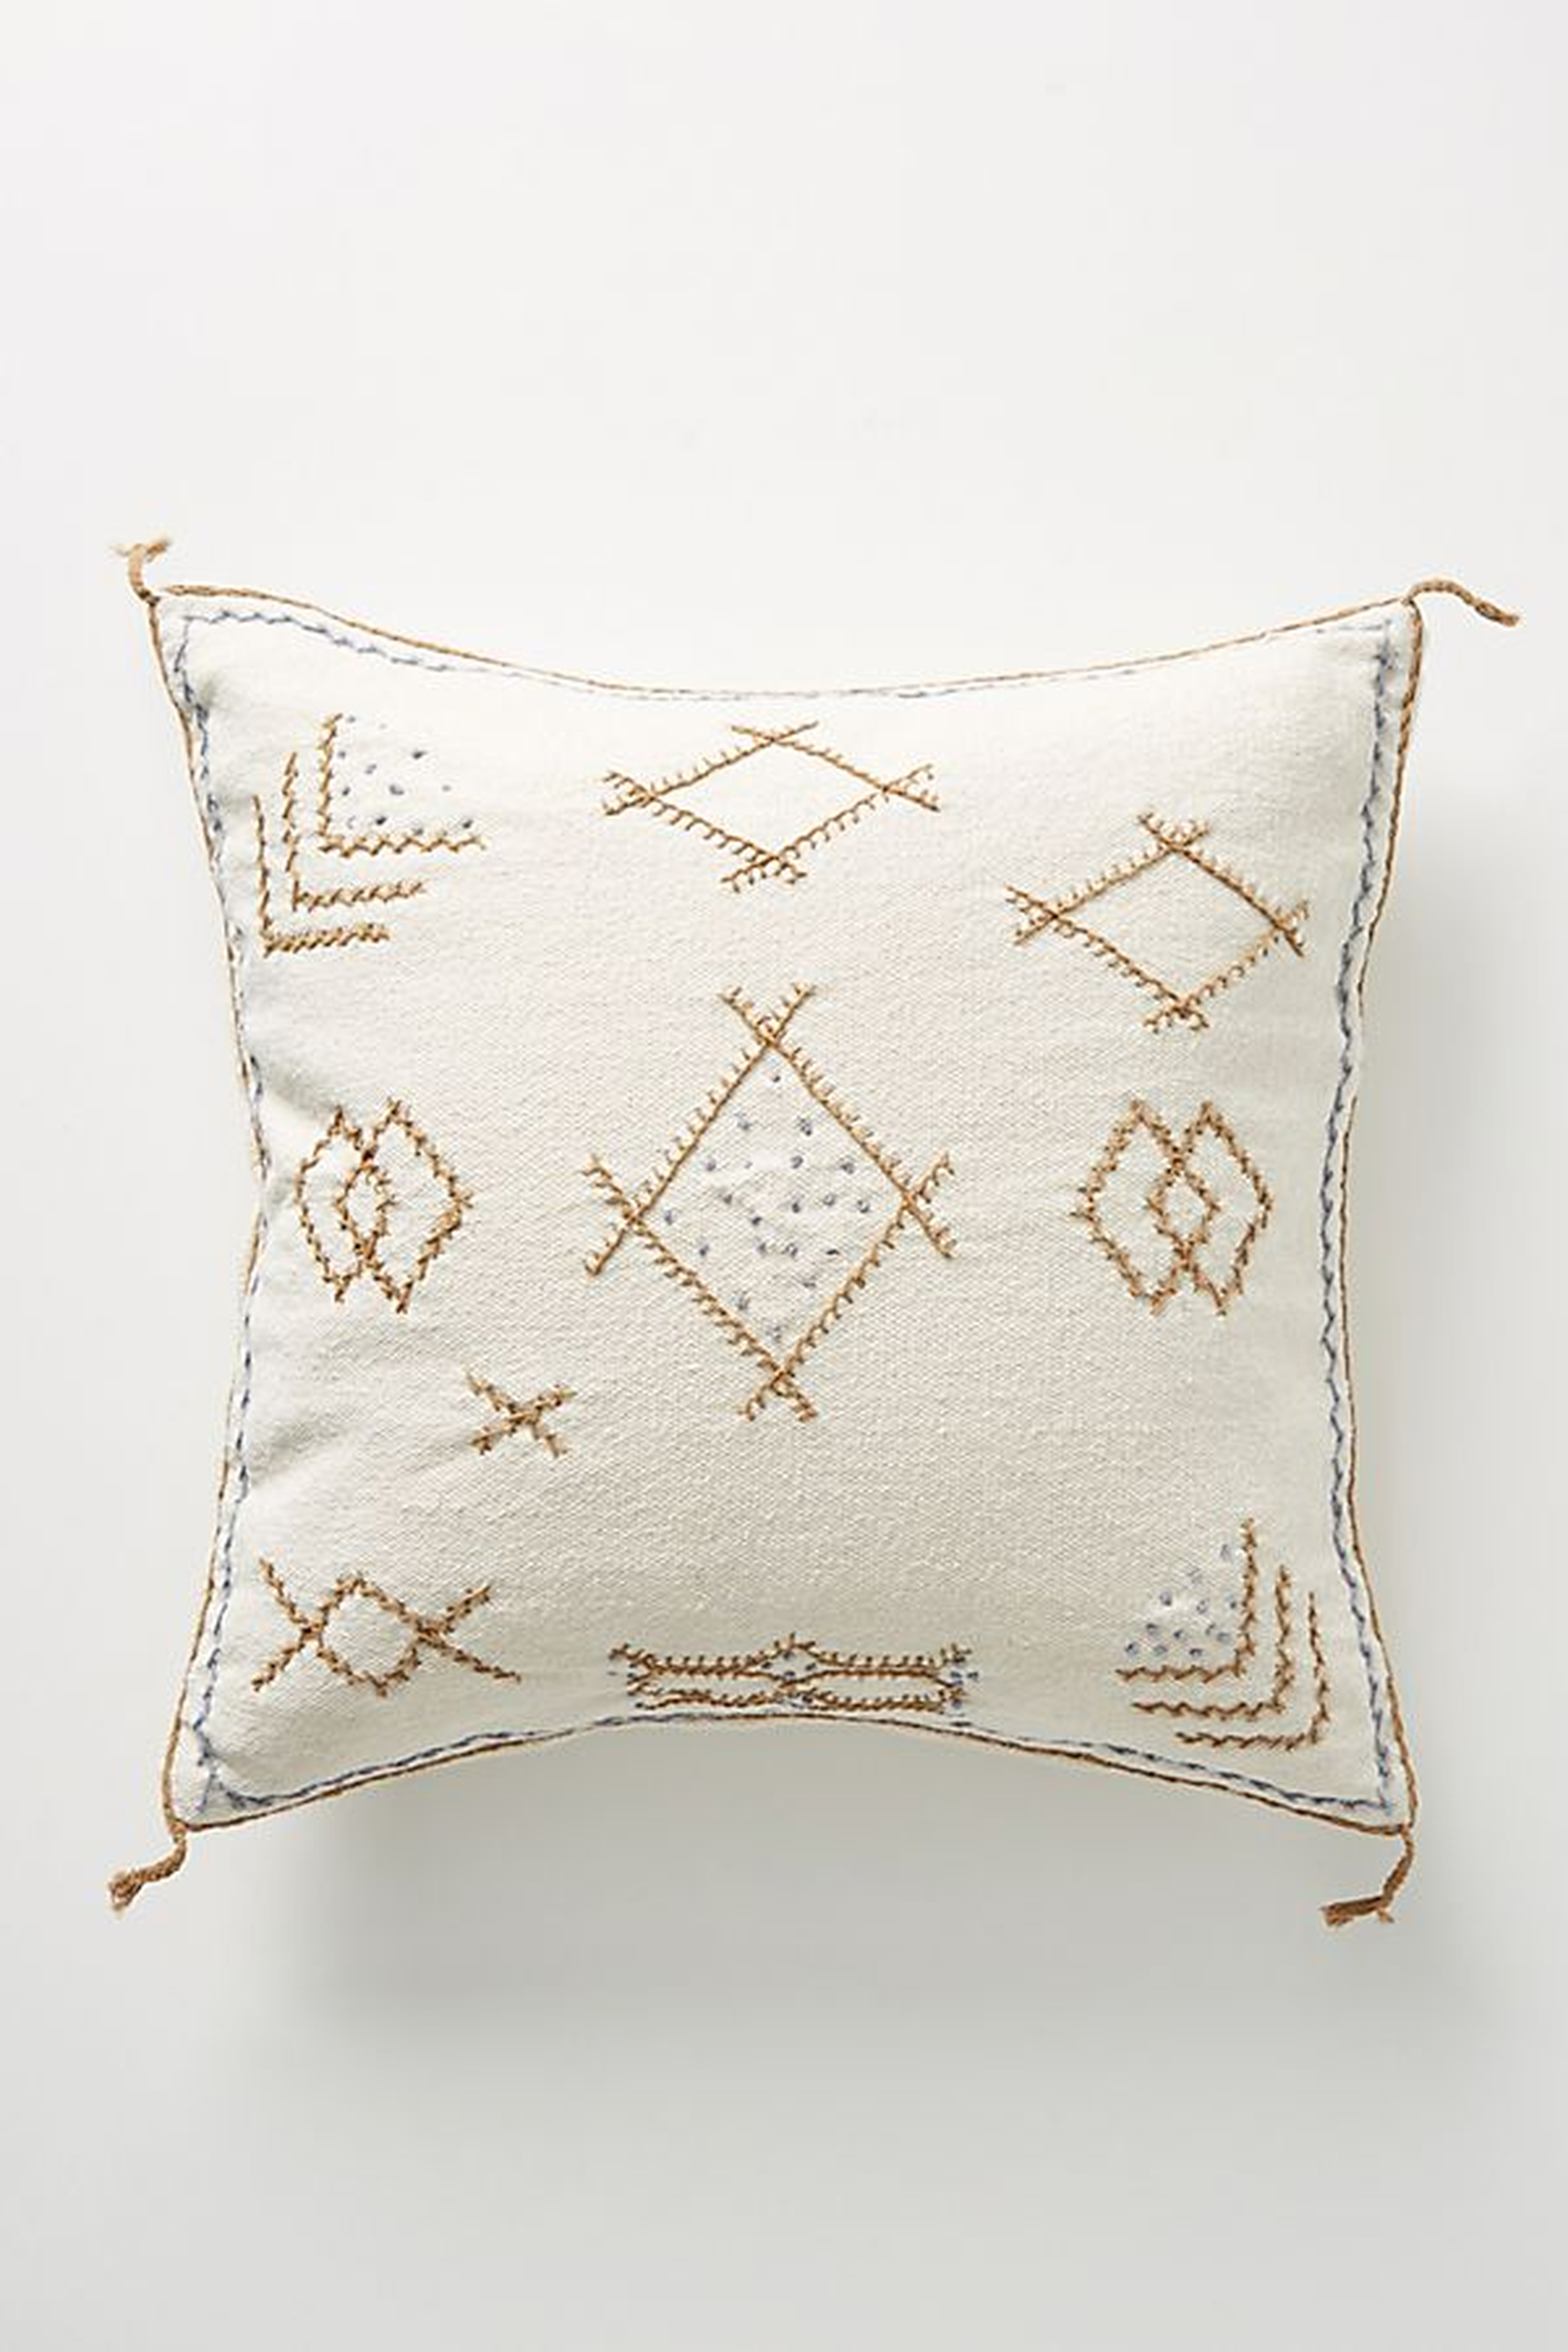 Joanna Gaines for Anthropologie Embroidered Sadie Pillow - Anthropologie